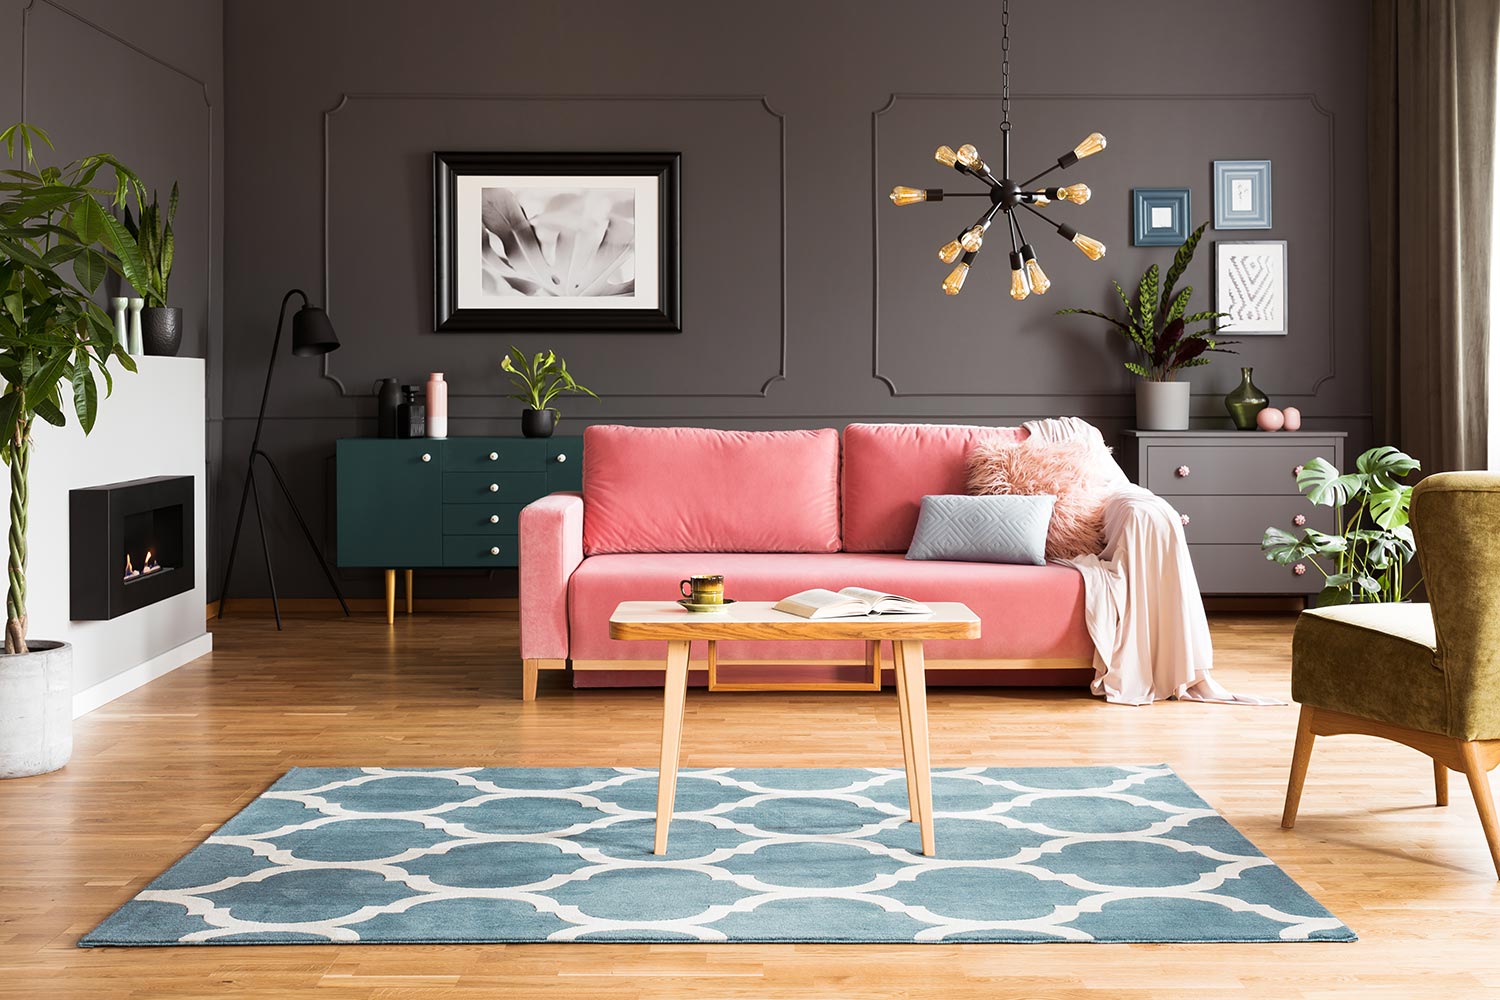 Wooden table on blue carpet in grey living room interior with fireplace and pink sofa